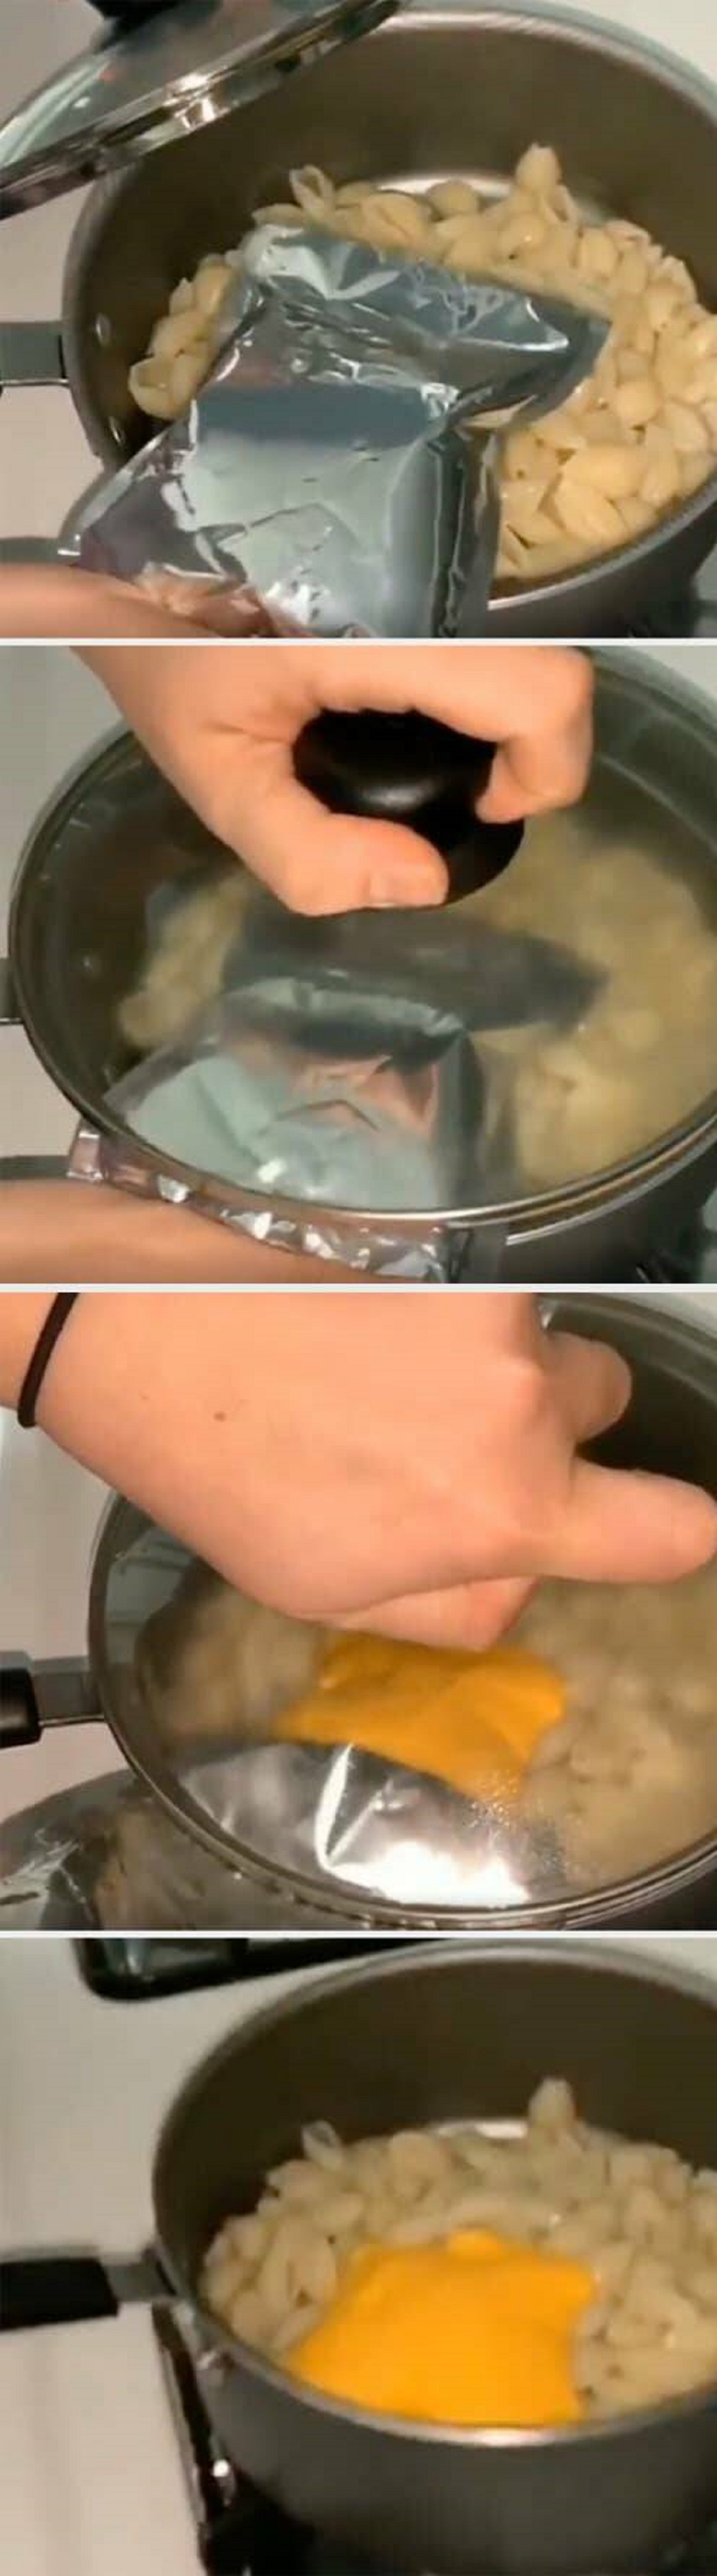 When trying to get sauce out of a pouch (such as with this mac 'n' cheese), use the lid of your pot to easily squeeze out every last bit of it."